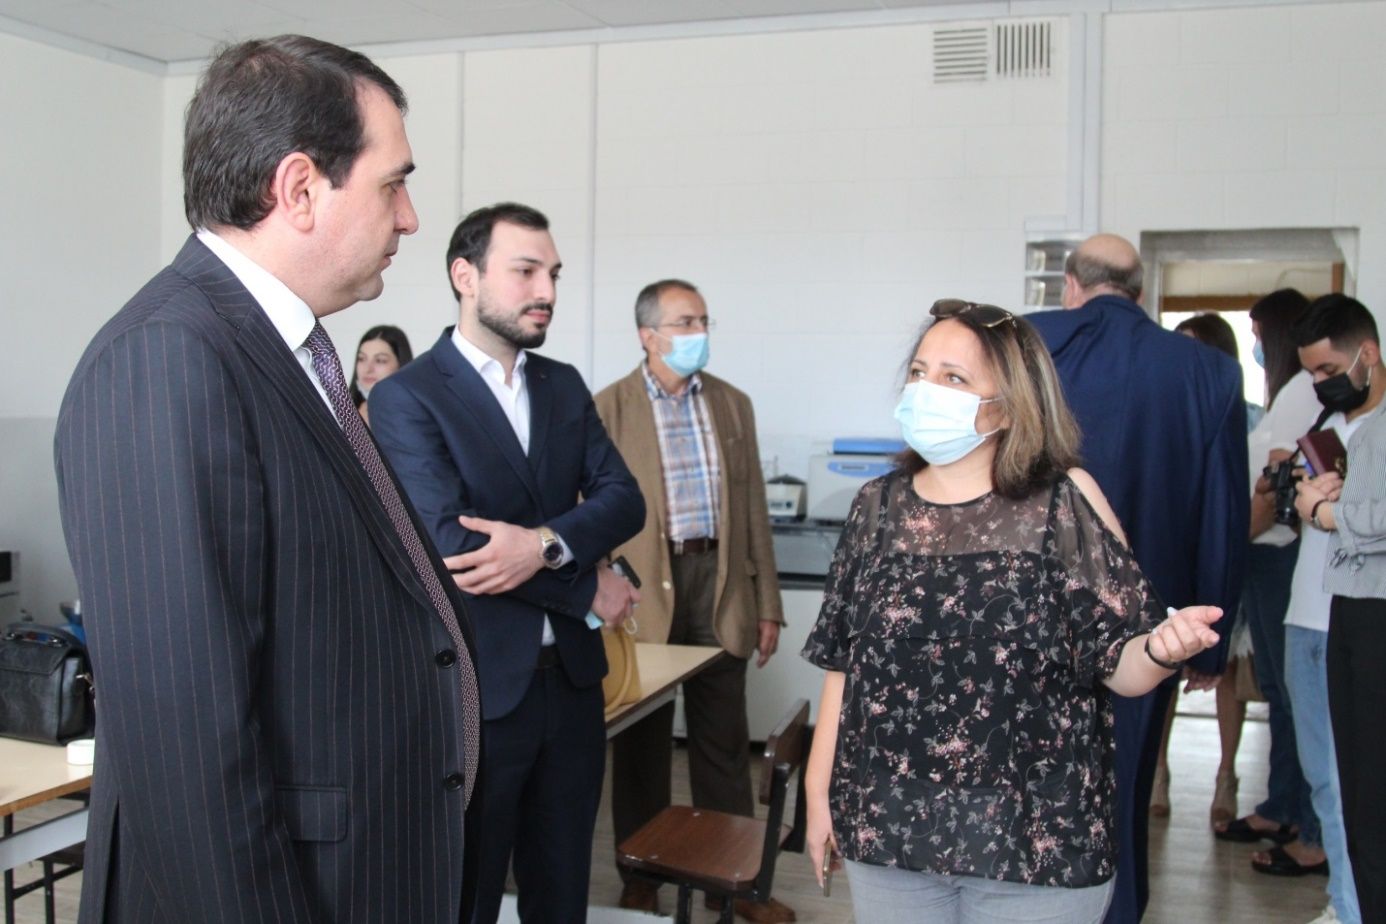 A modern laboratory of Microbiology and Biotechnology was officially opened at SUSh